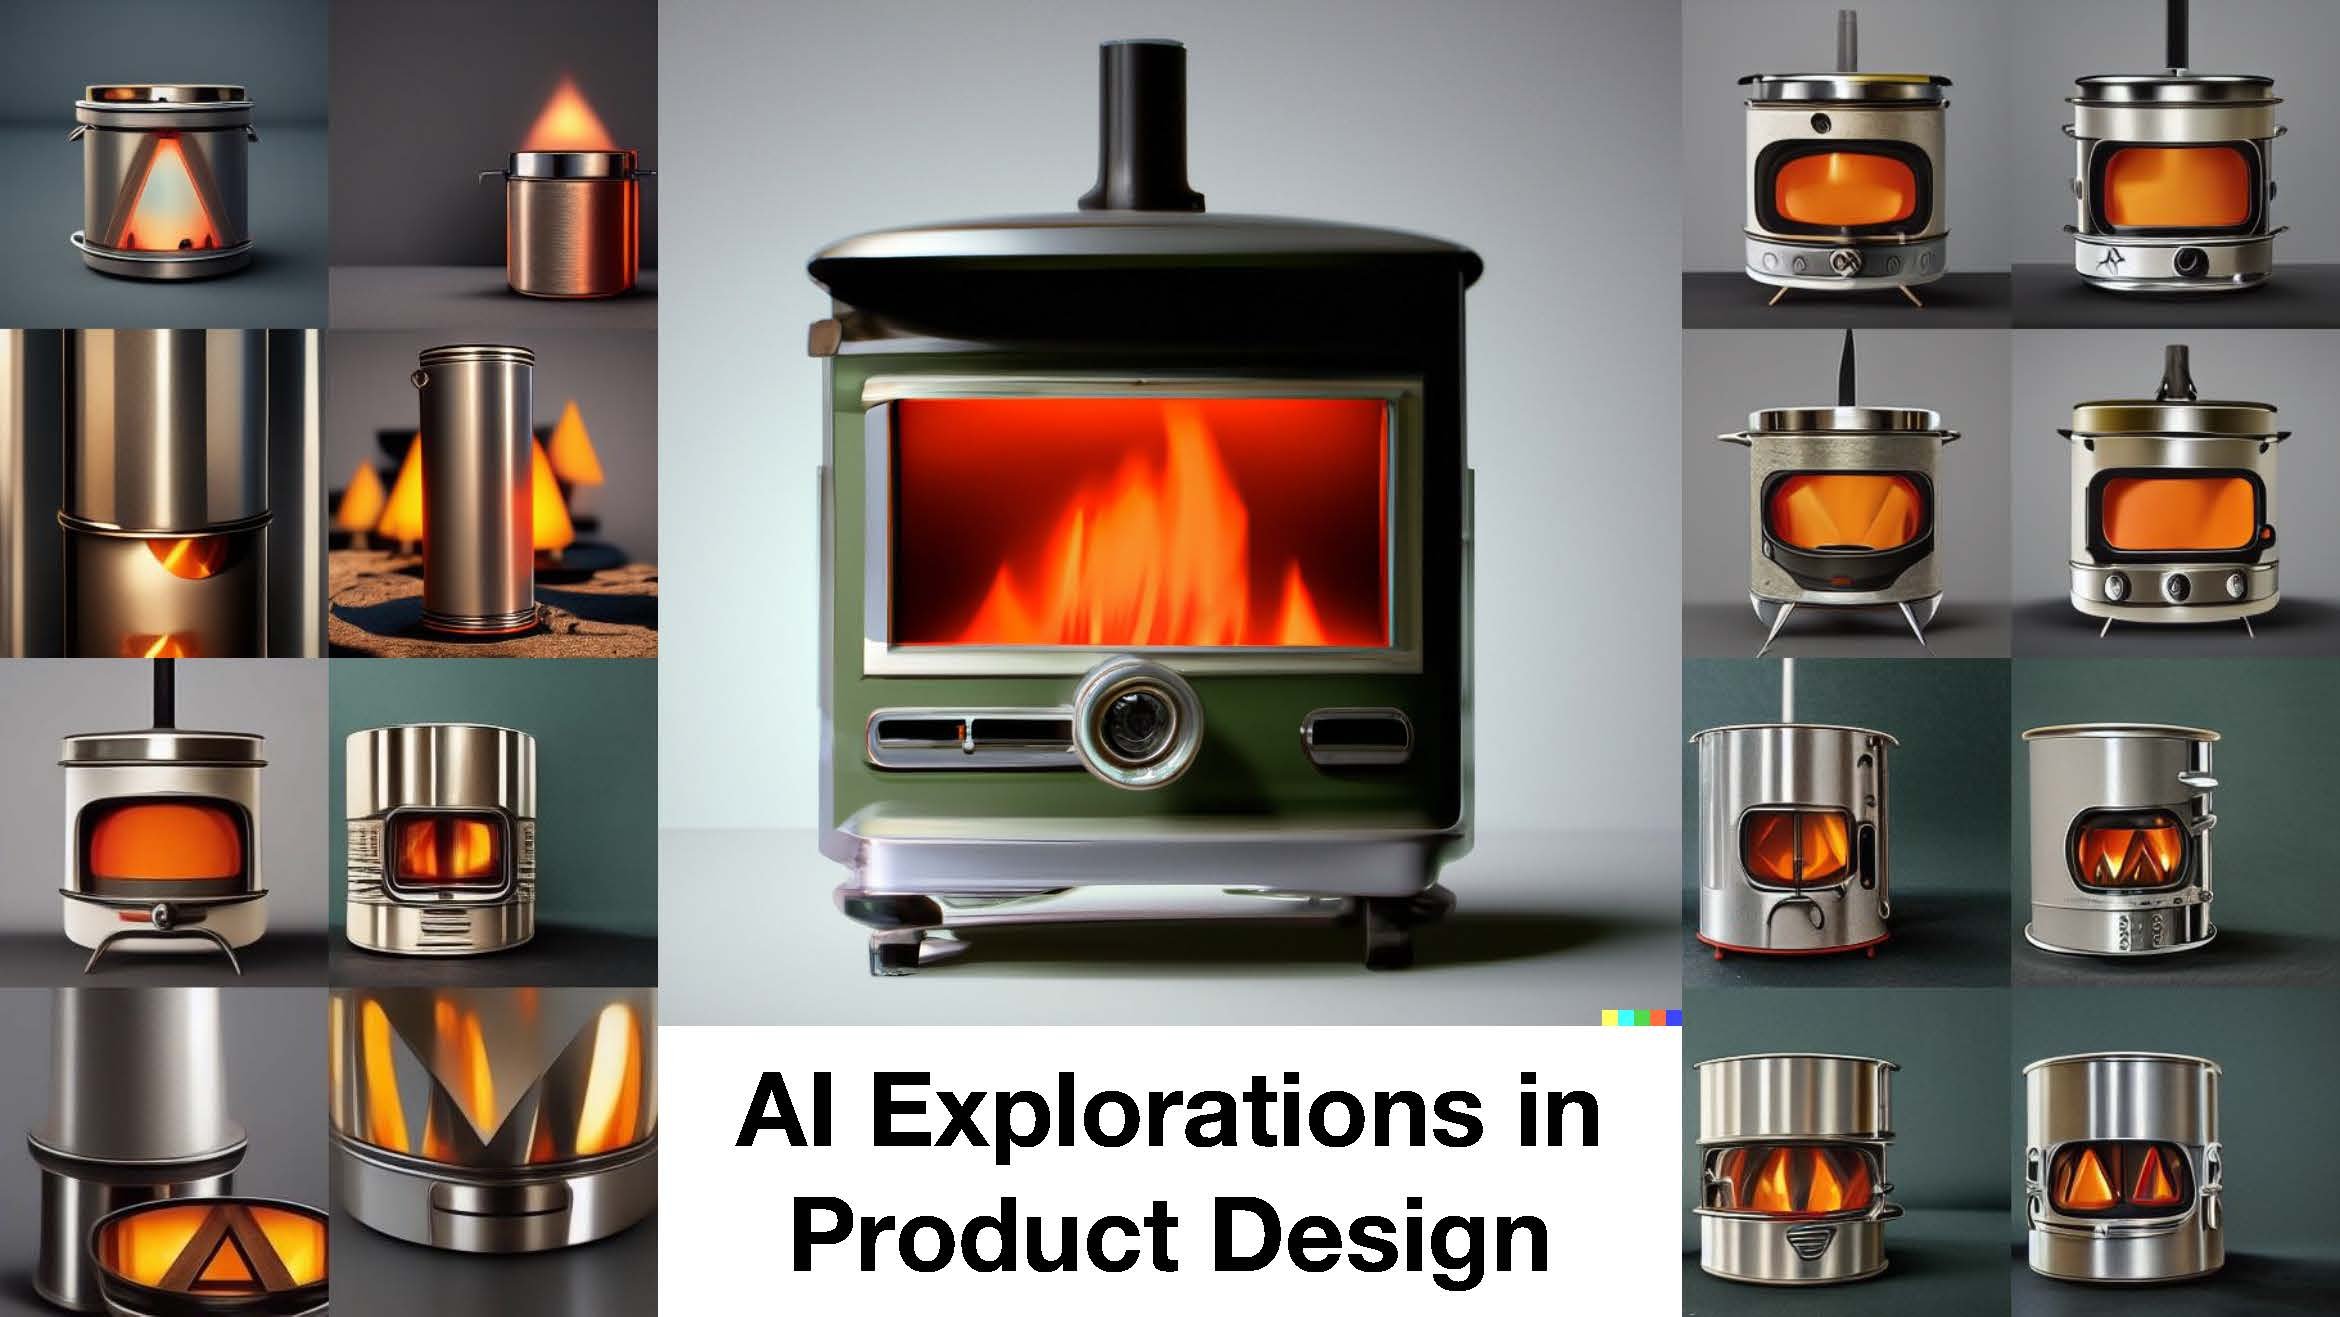 AI-generated images of stoves.